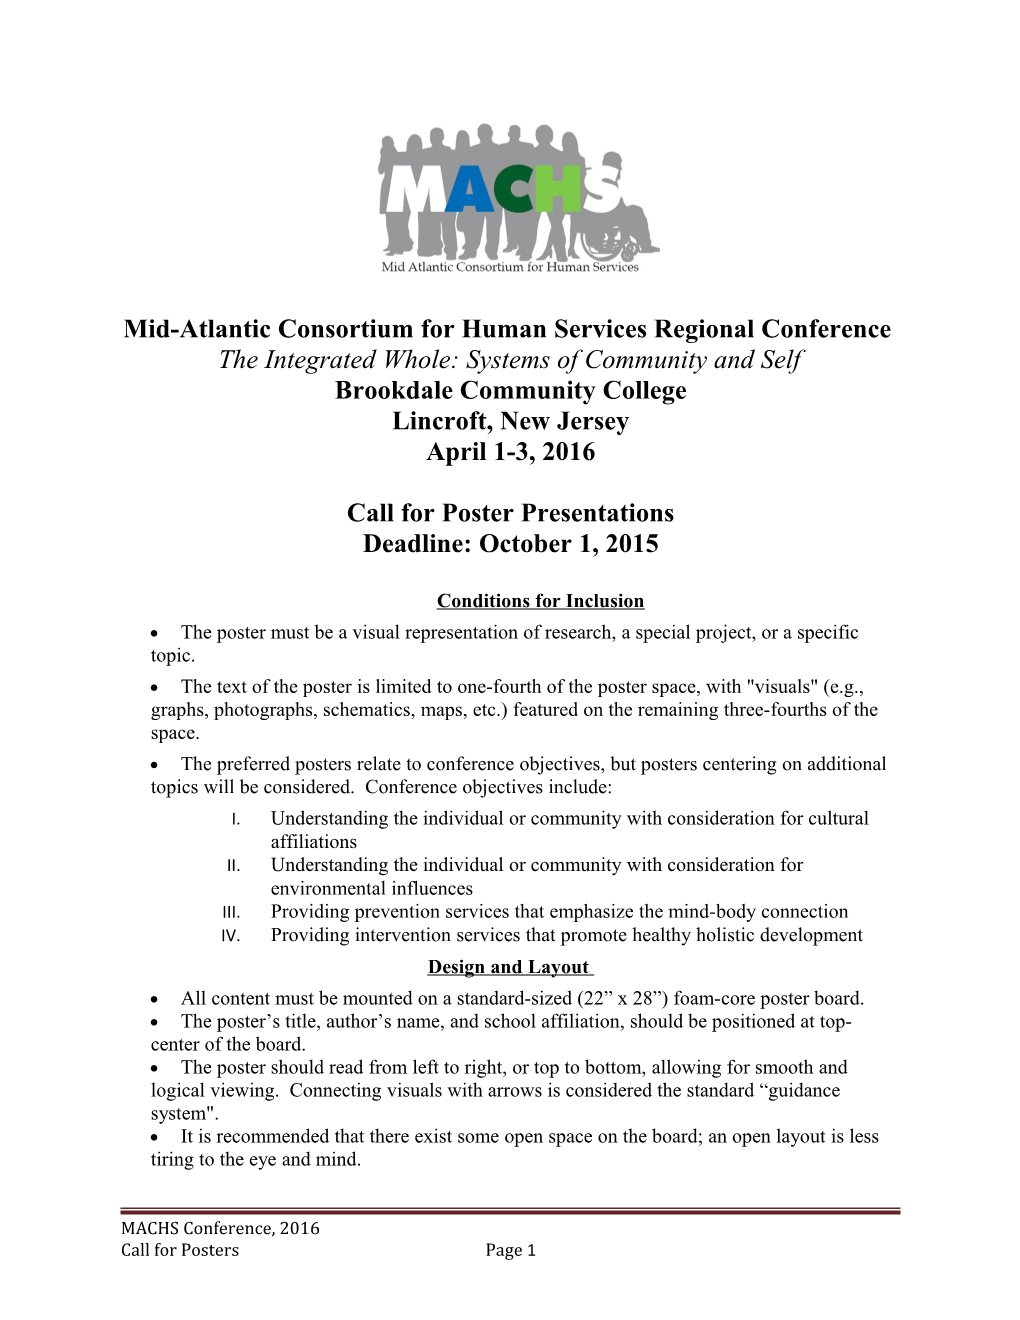 Mid-Atlantic Consortium for Human Services Regional Conference